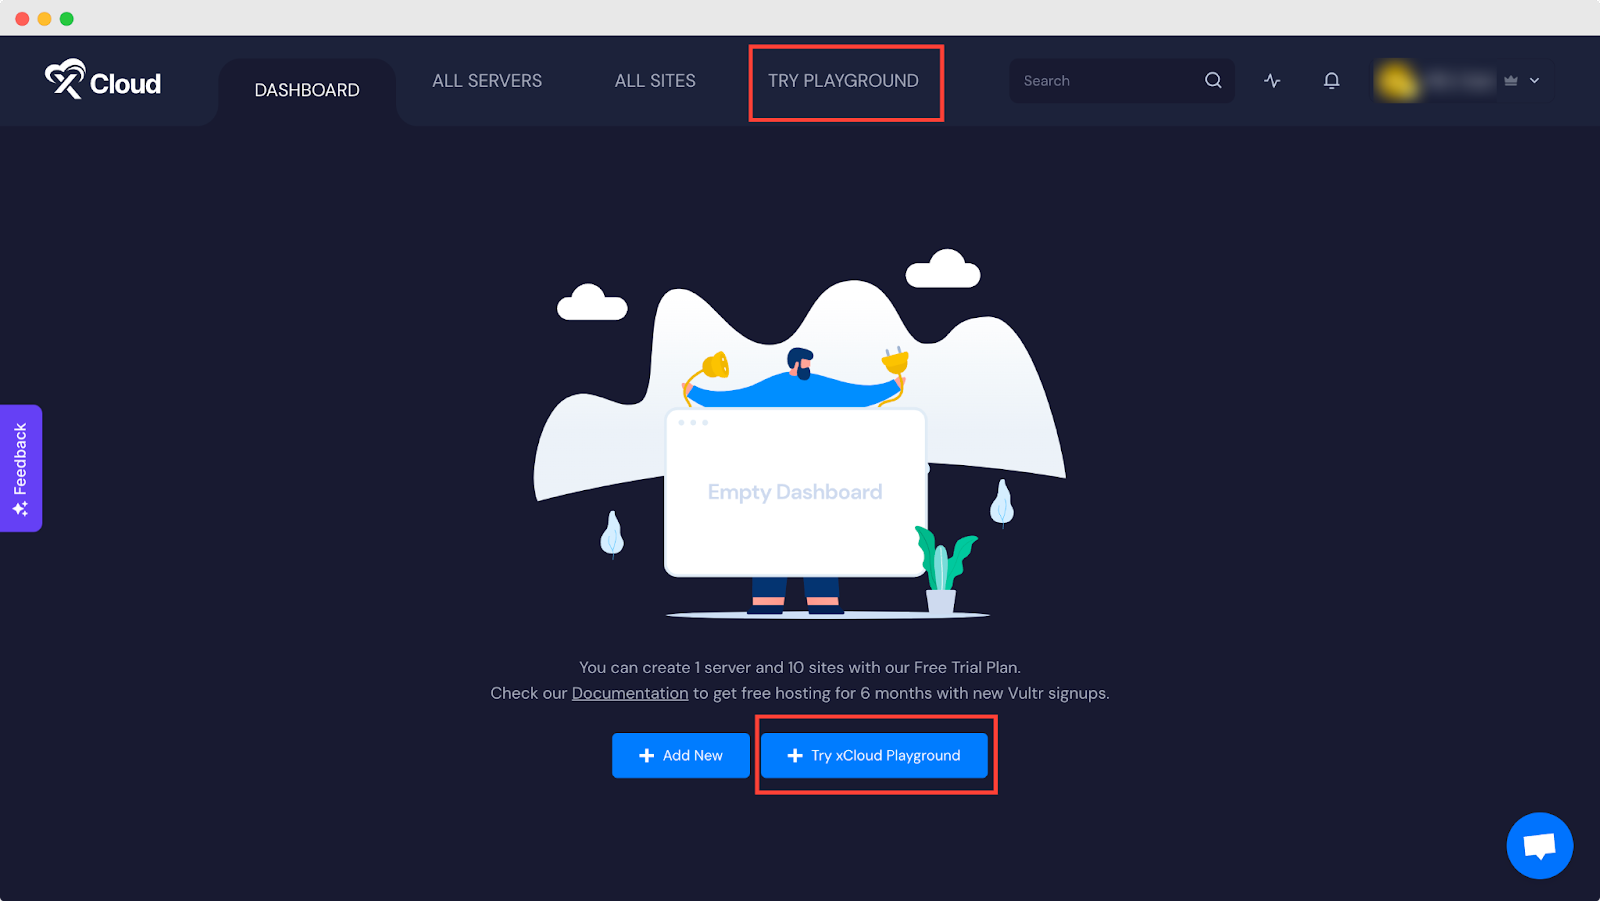 How To Use xCloud Playground Feature